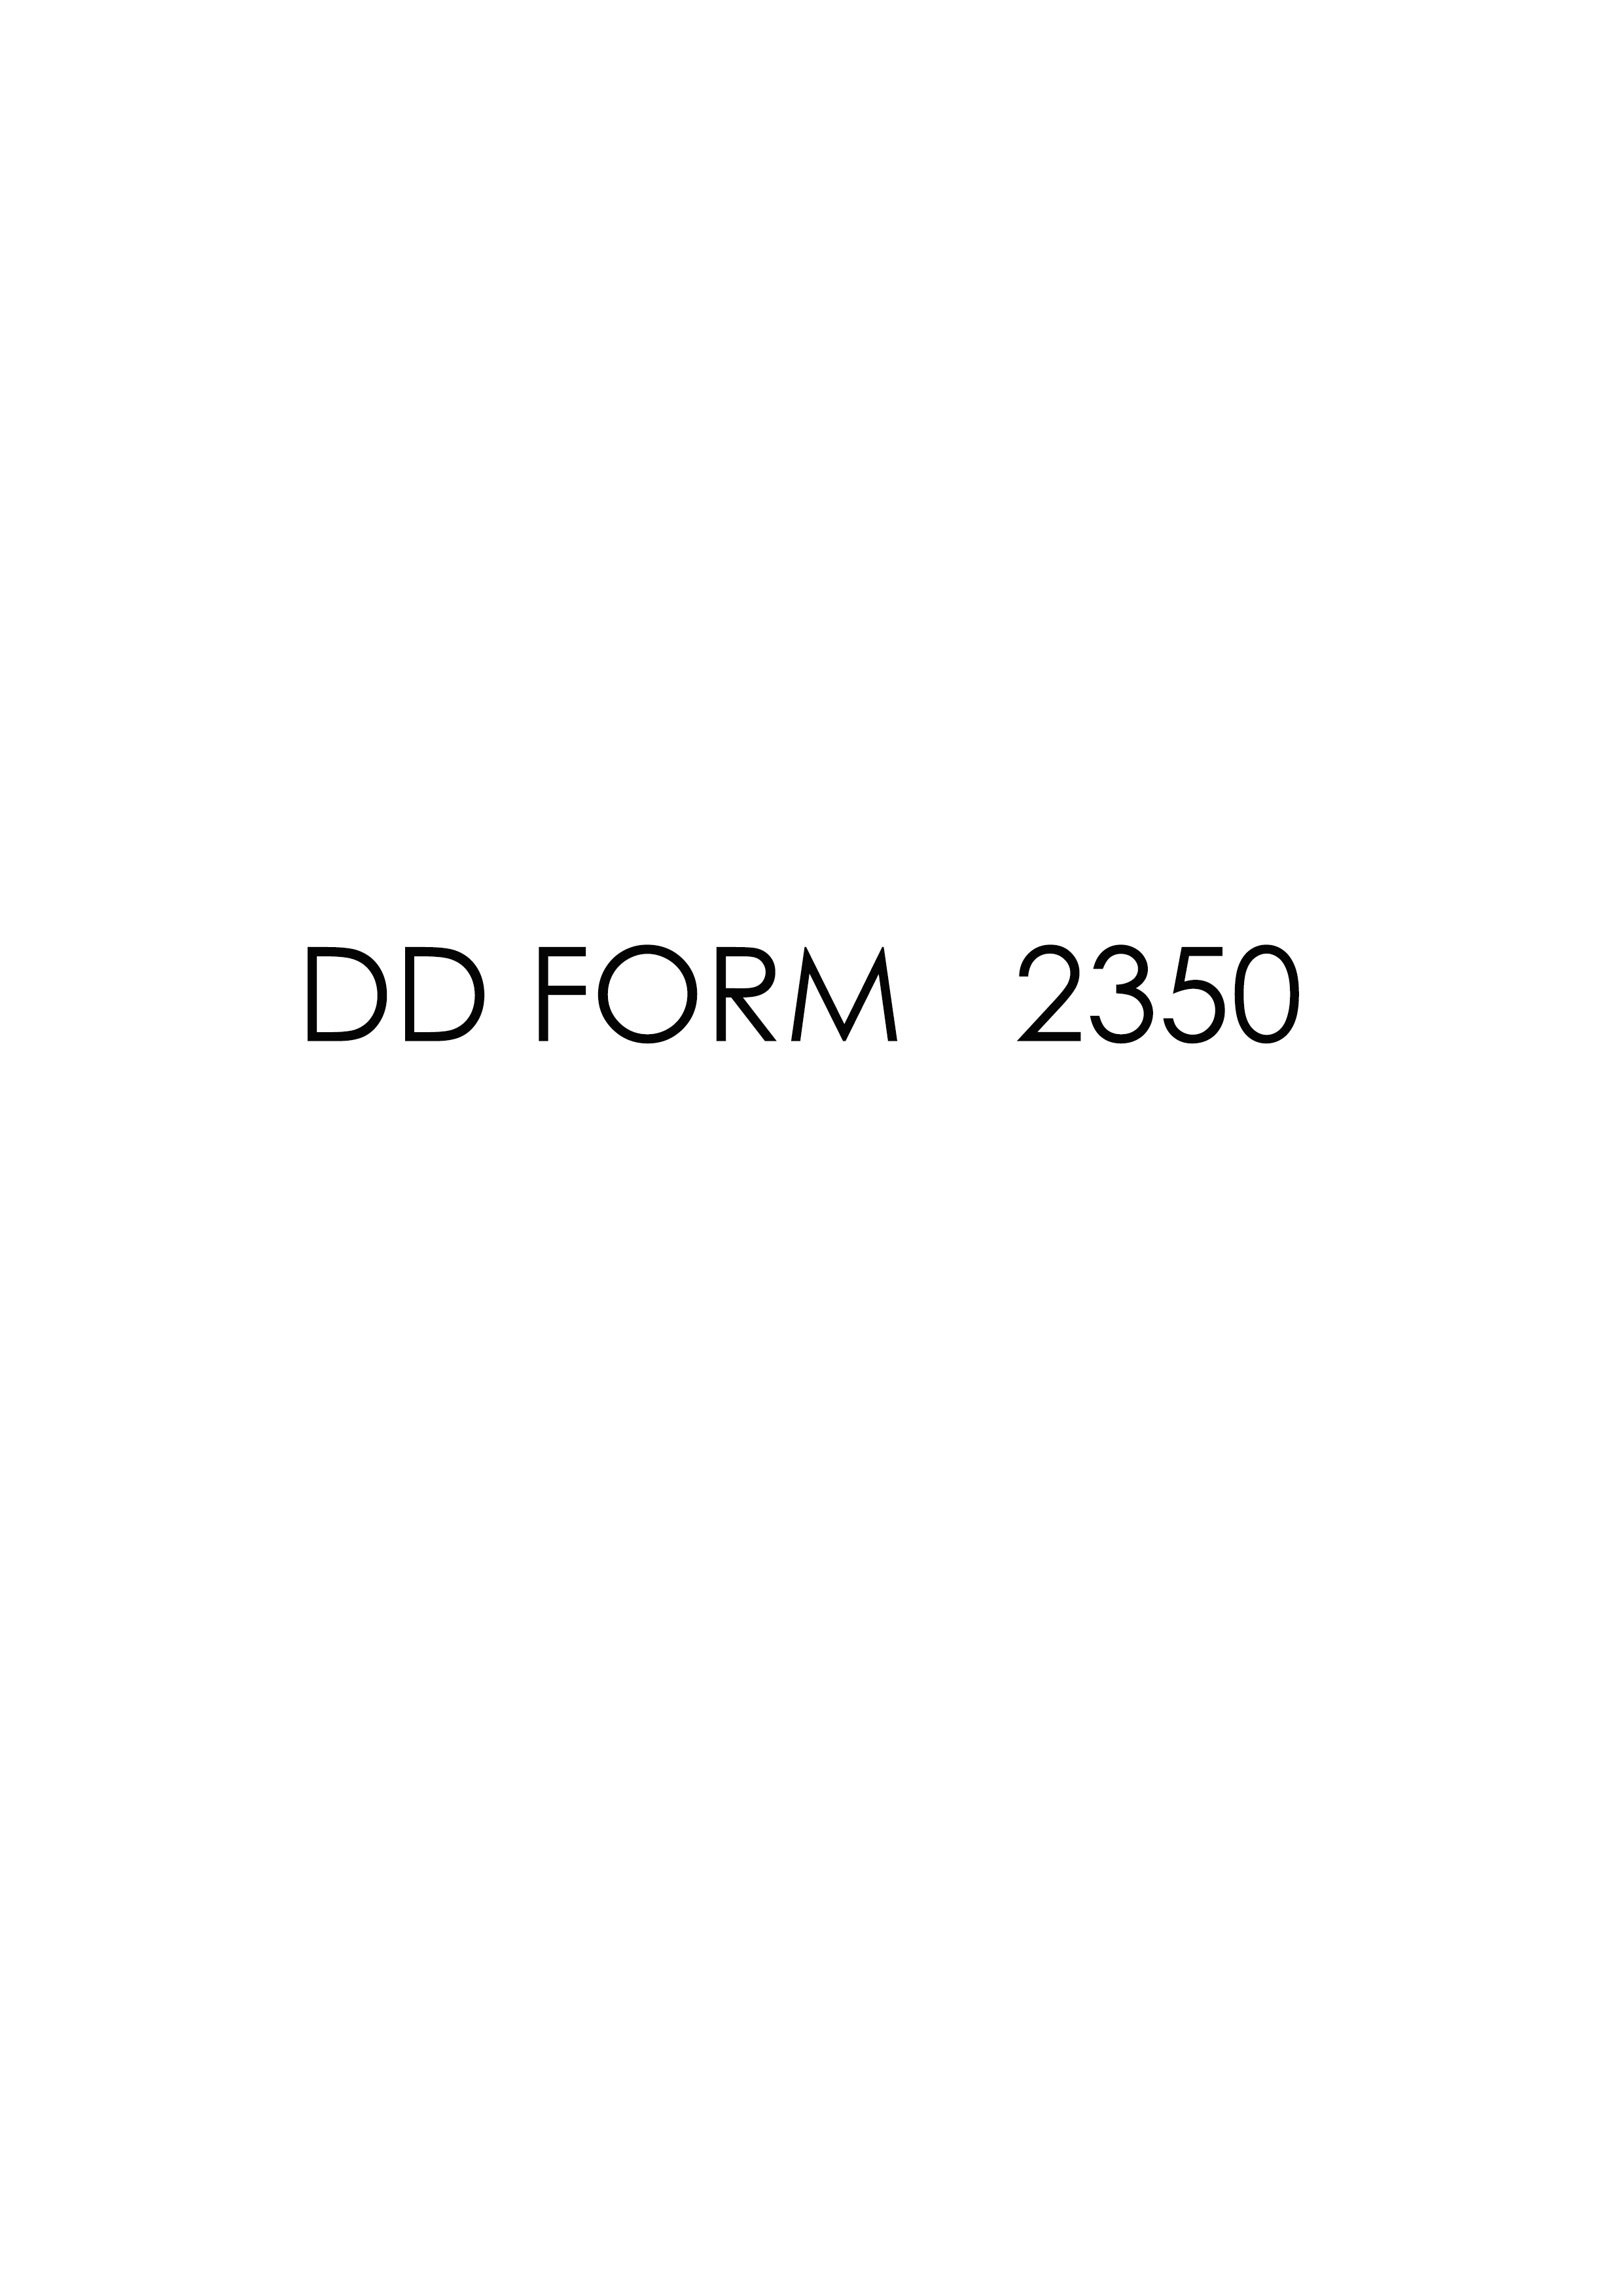 Download Fillable dd Form 2350